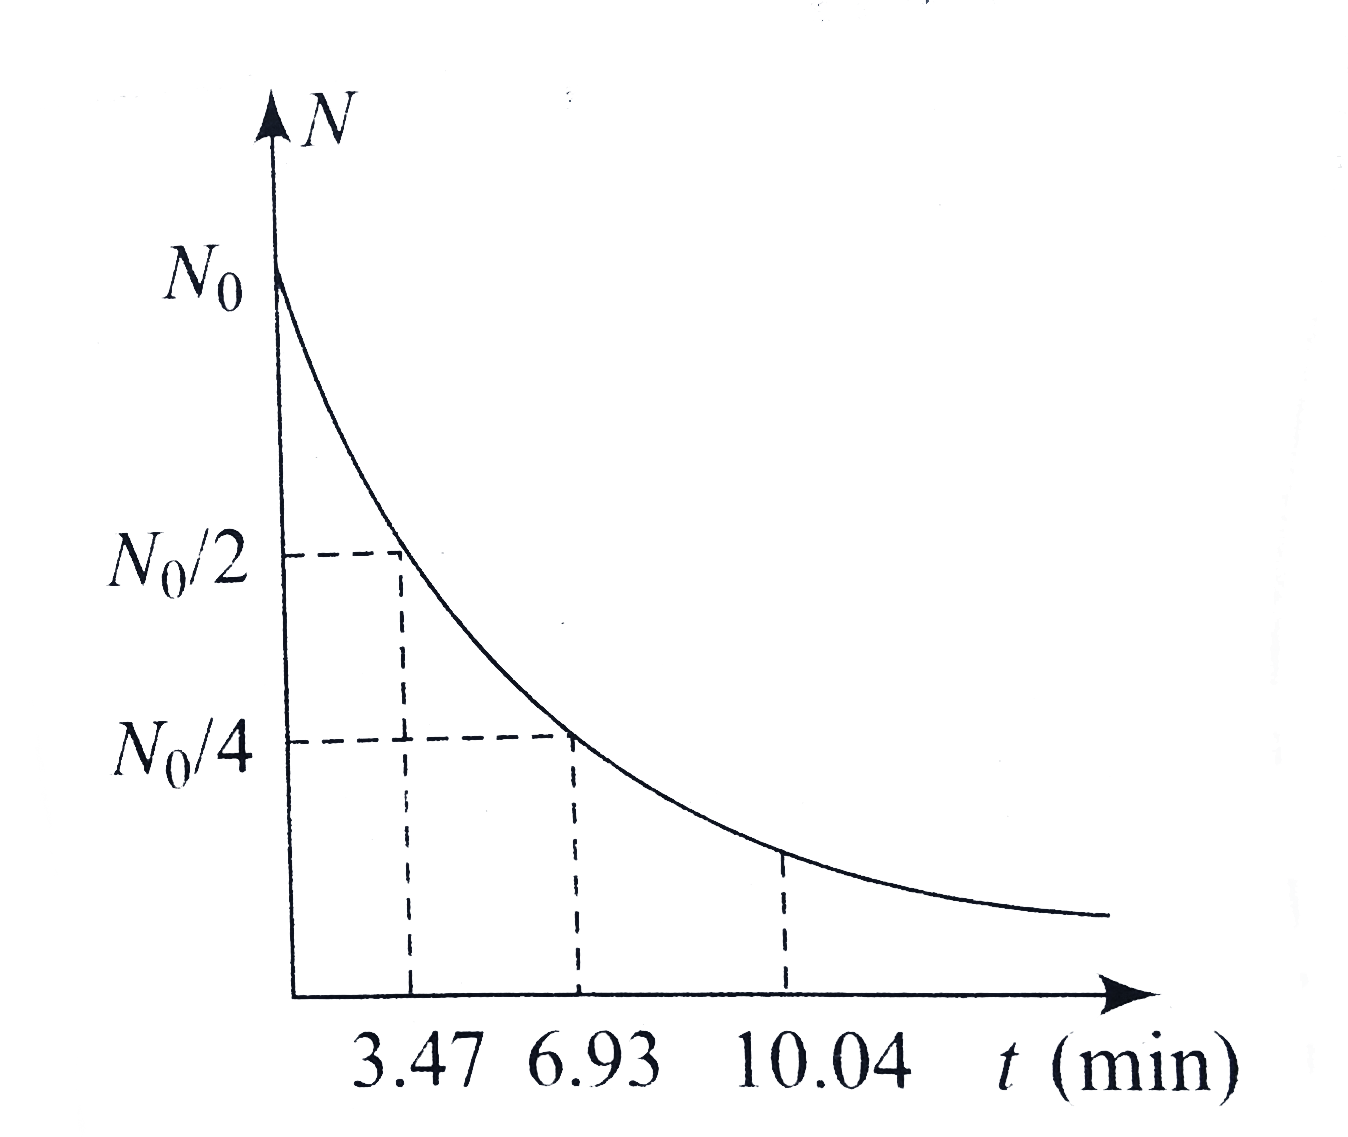 A radioactive sample undergoes decay as per the following gragp. At time t=0, the number of undecayed nuclei is N(0). Calculate the number of nuclei left after 1 h.   .